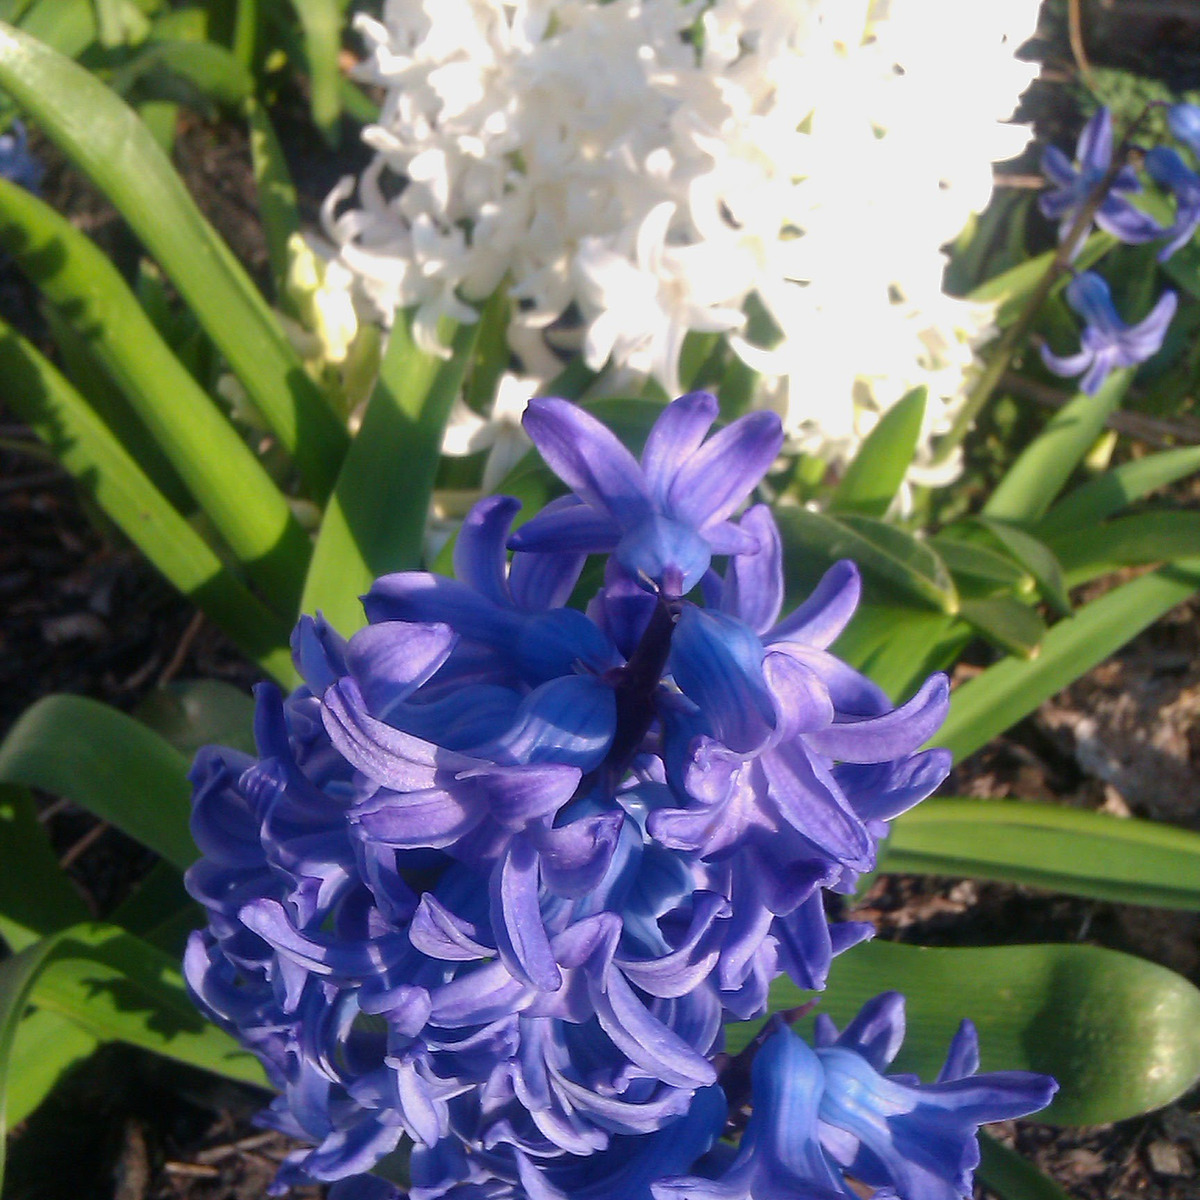 Blooming Hyacinths - Transplanting Hyacinth Bulbs from Pots to the Ground is Easy!